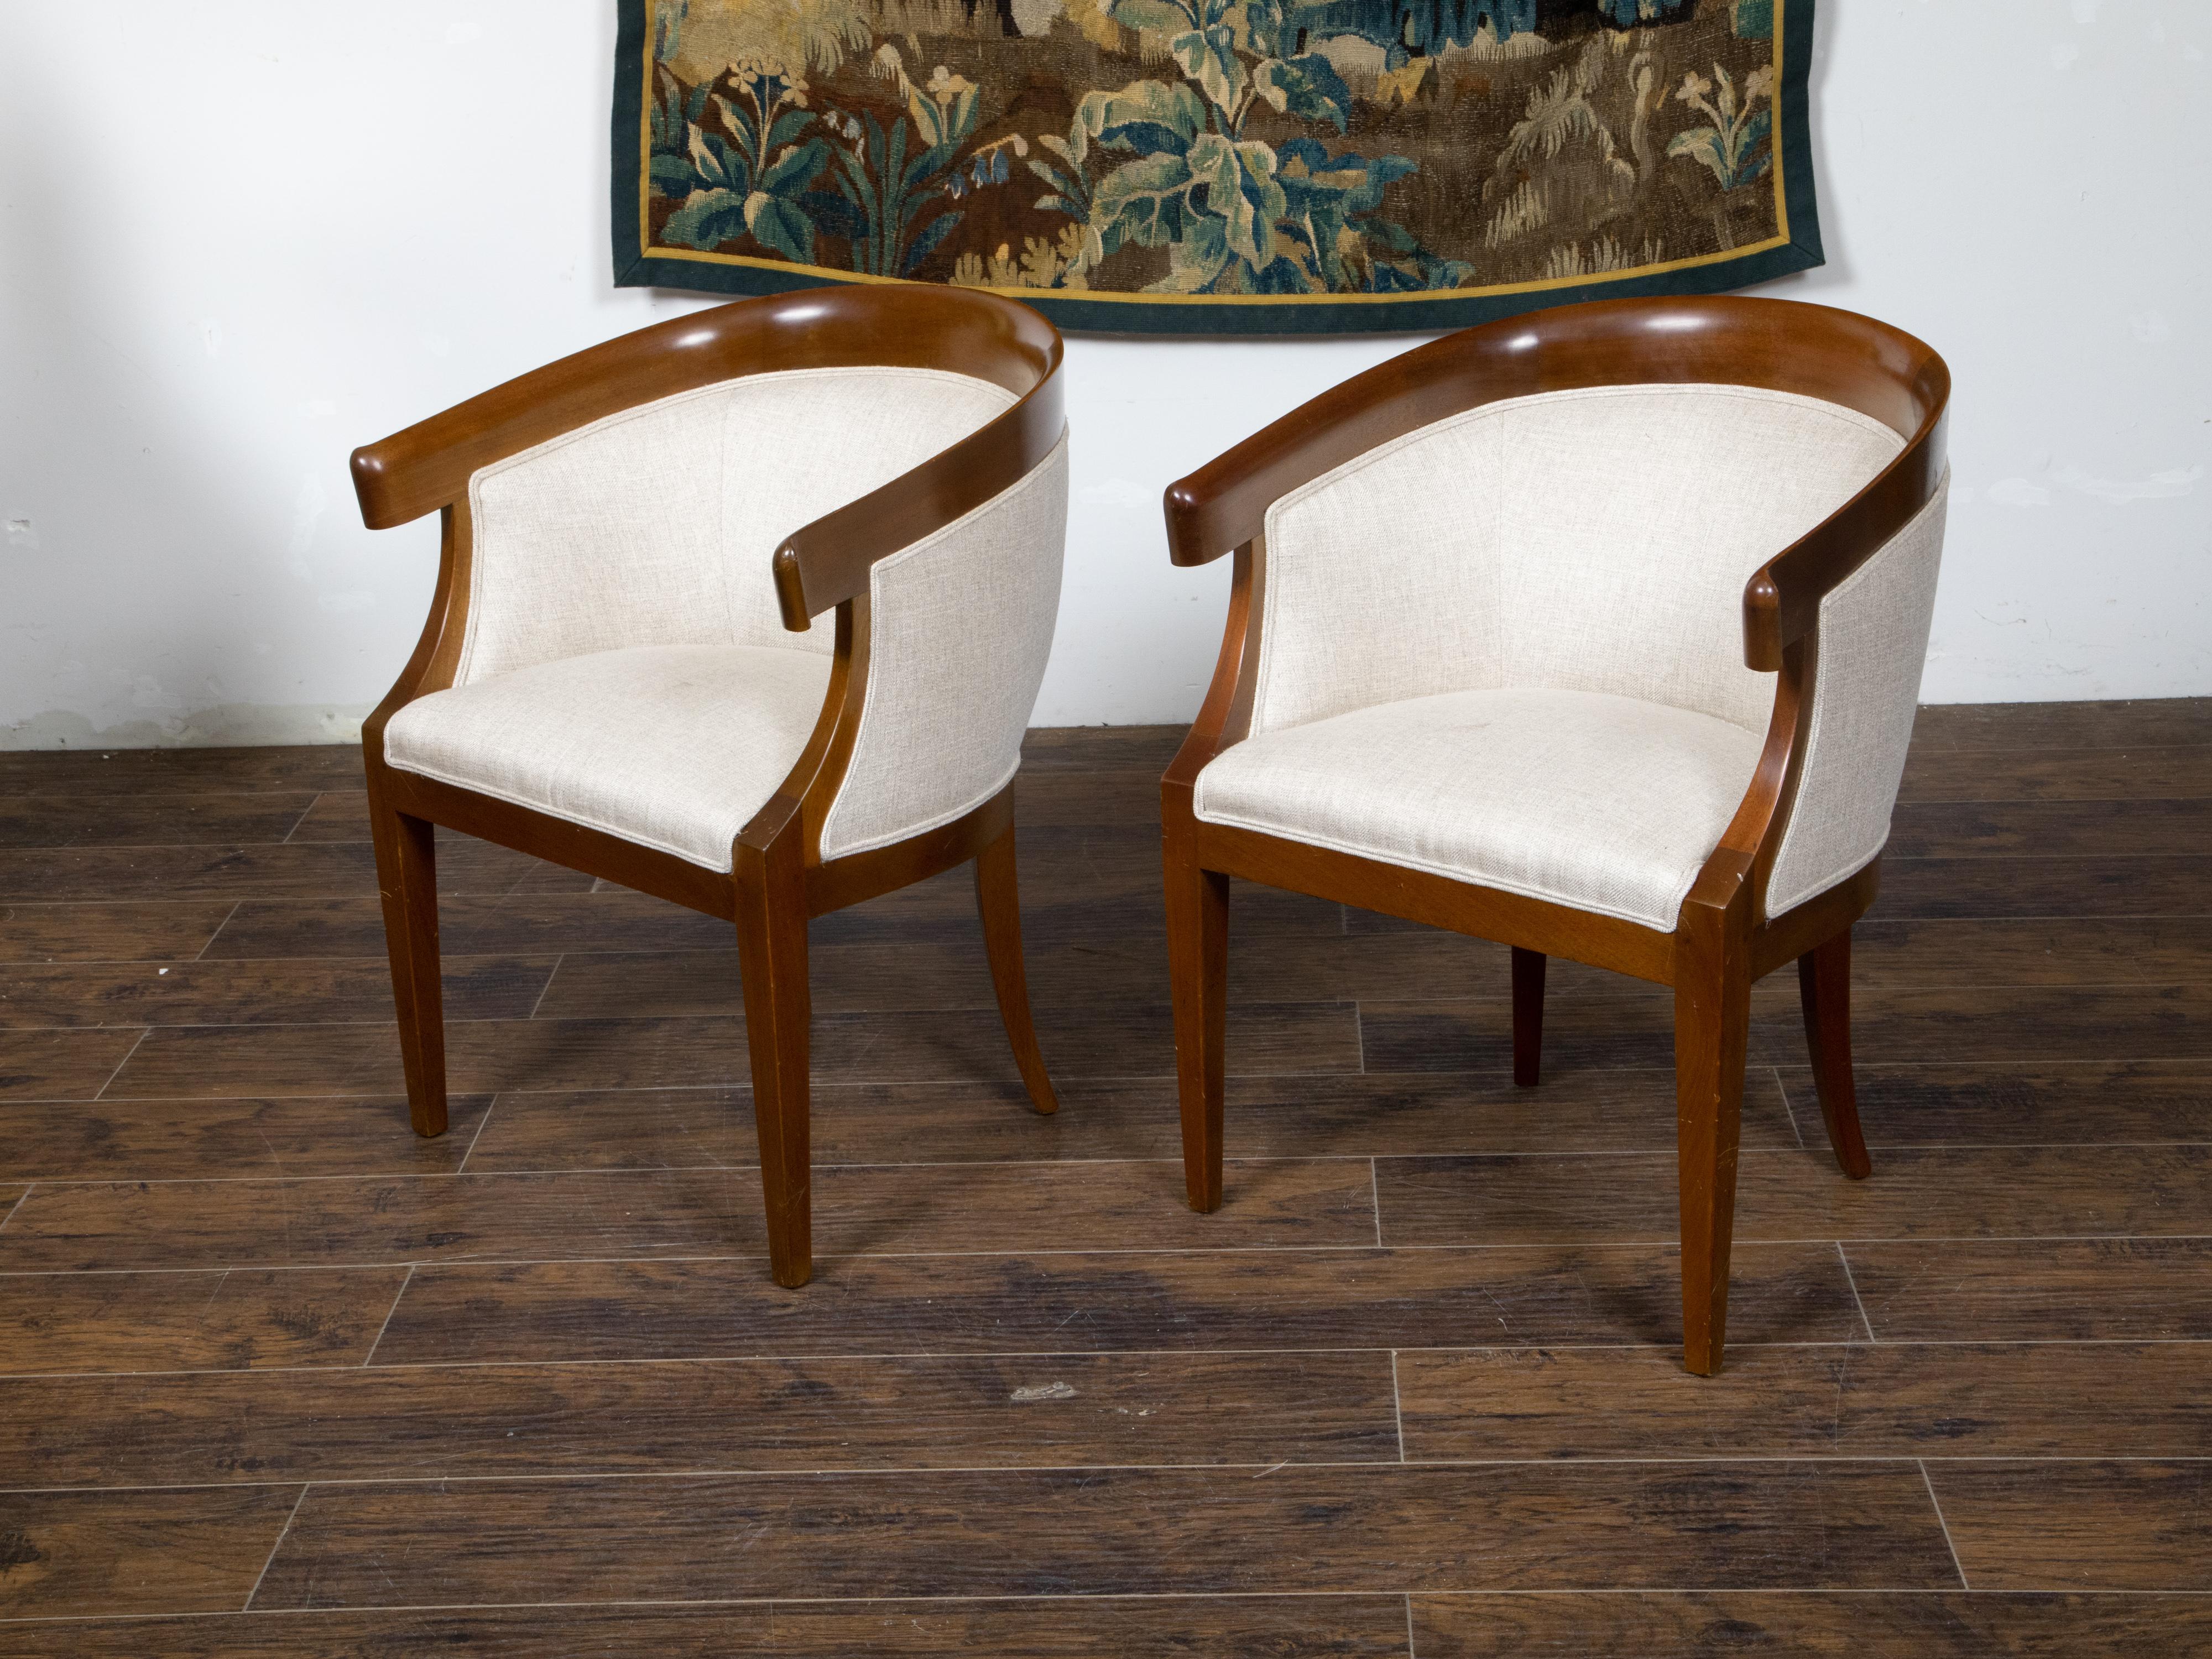 Pair of French Art Deco Period 1930s Walnut Horseshoe Back Upholstered Armchairs In Good Condition For Sale In Atlanta, GA